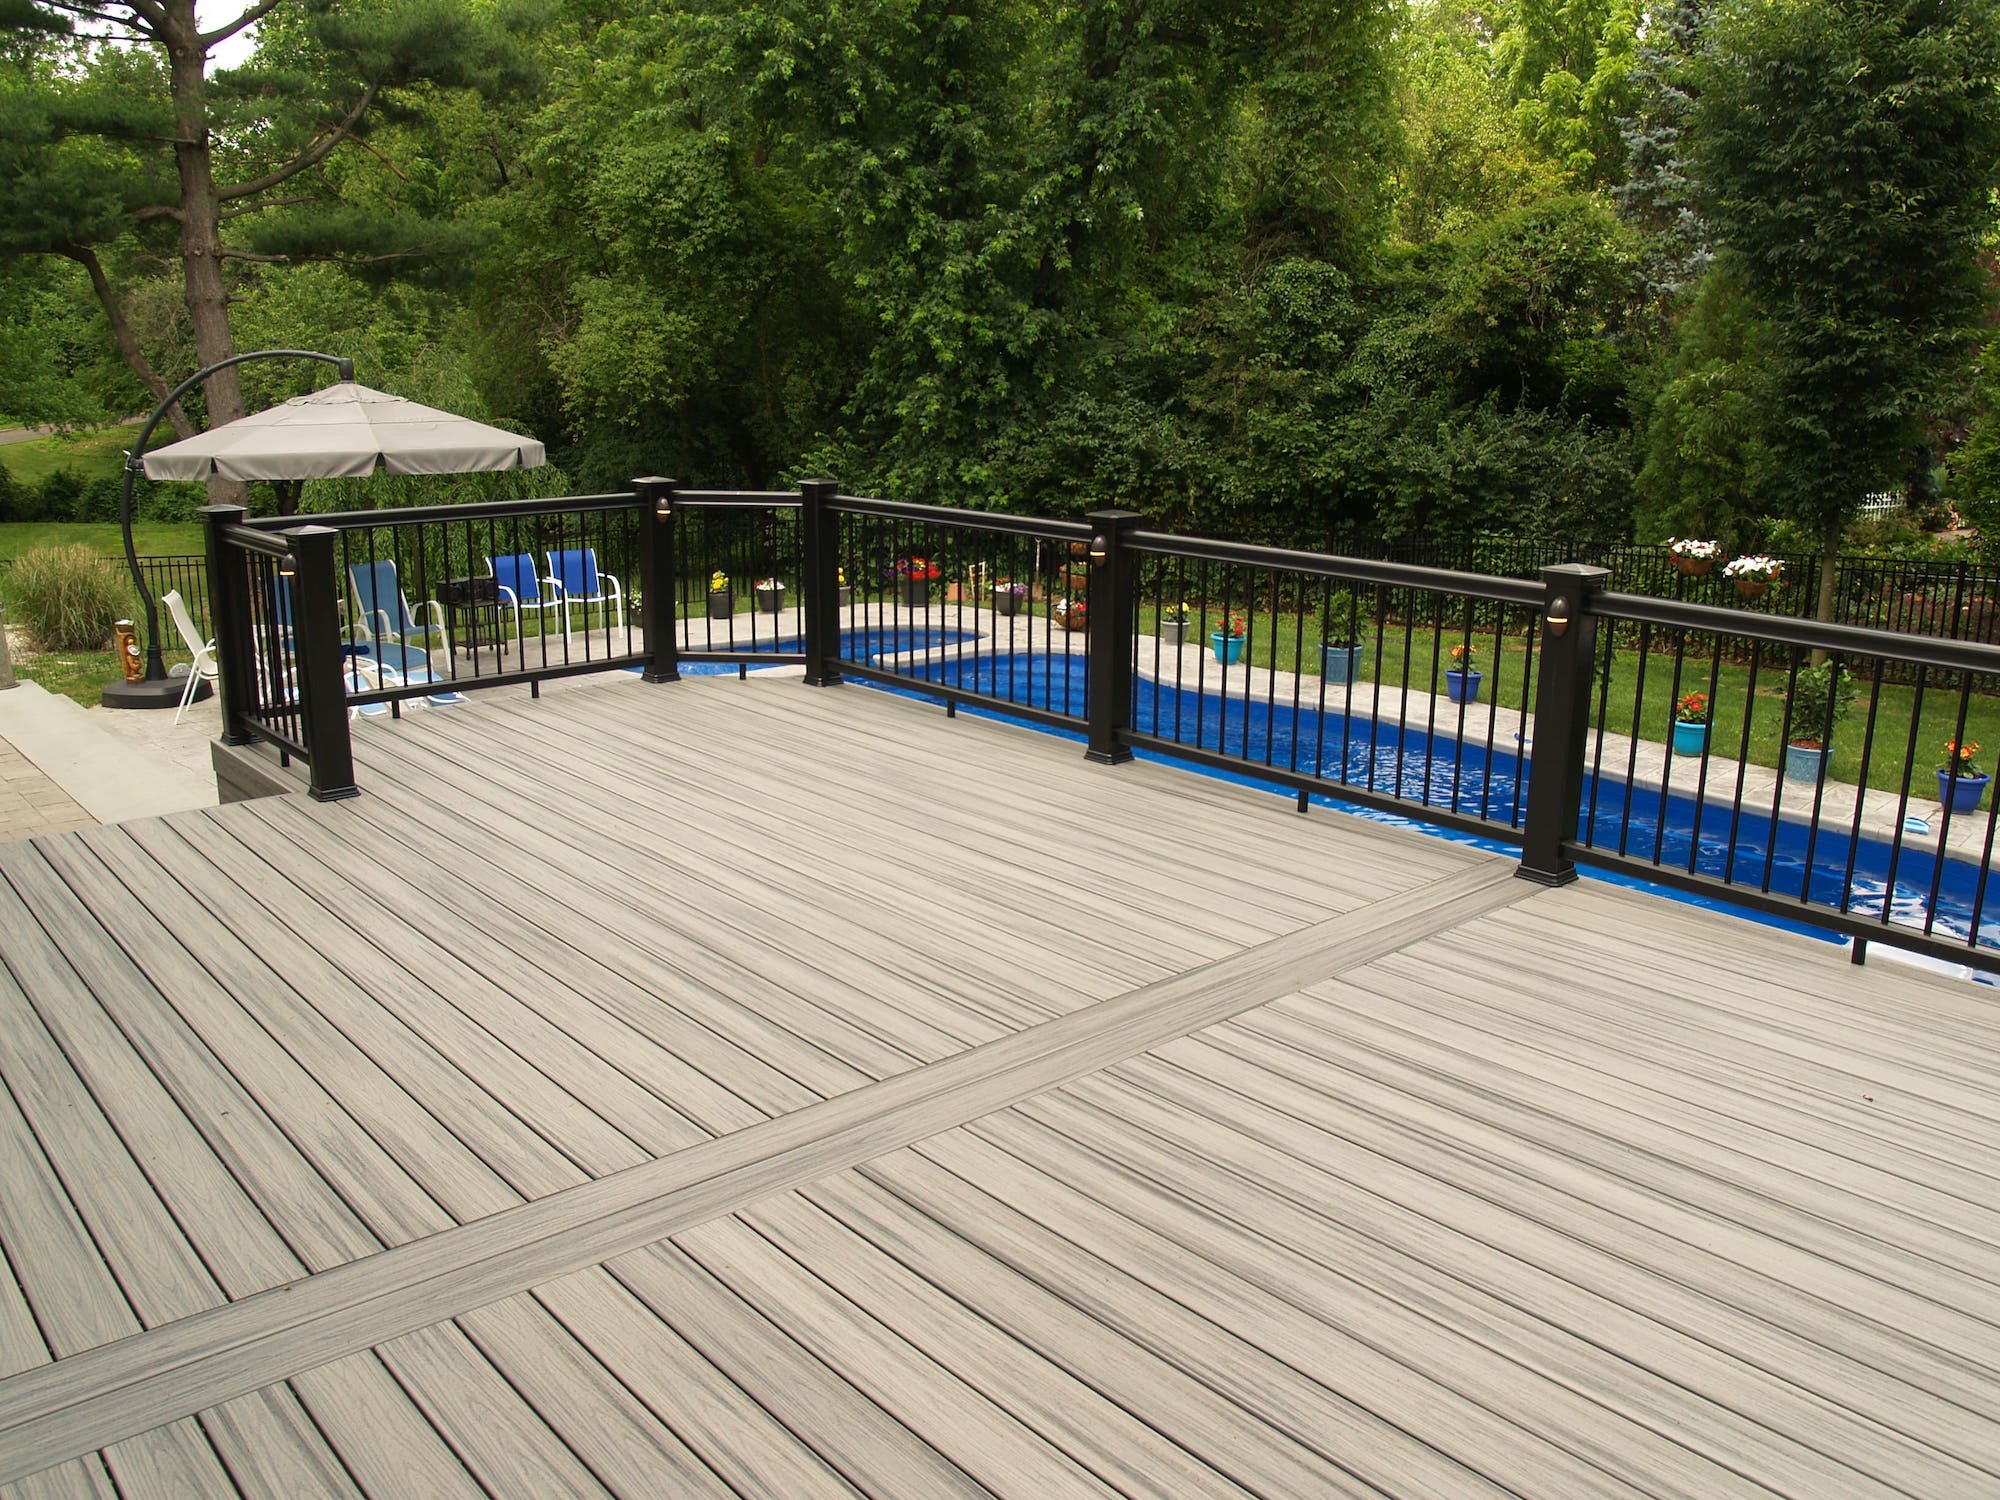 McHenry deck overlooking a pool in a backyard.